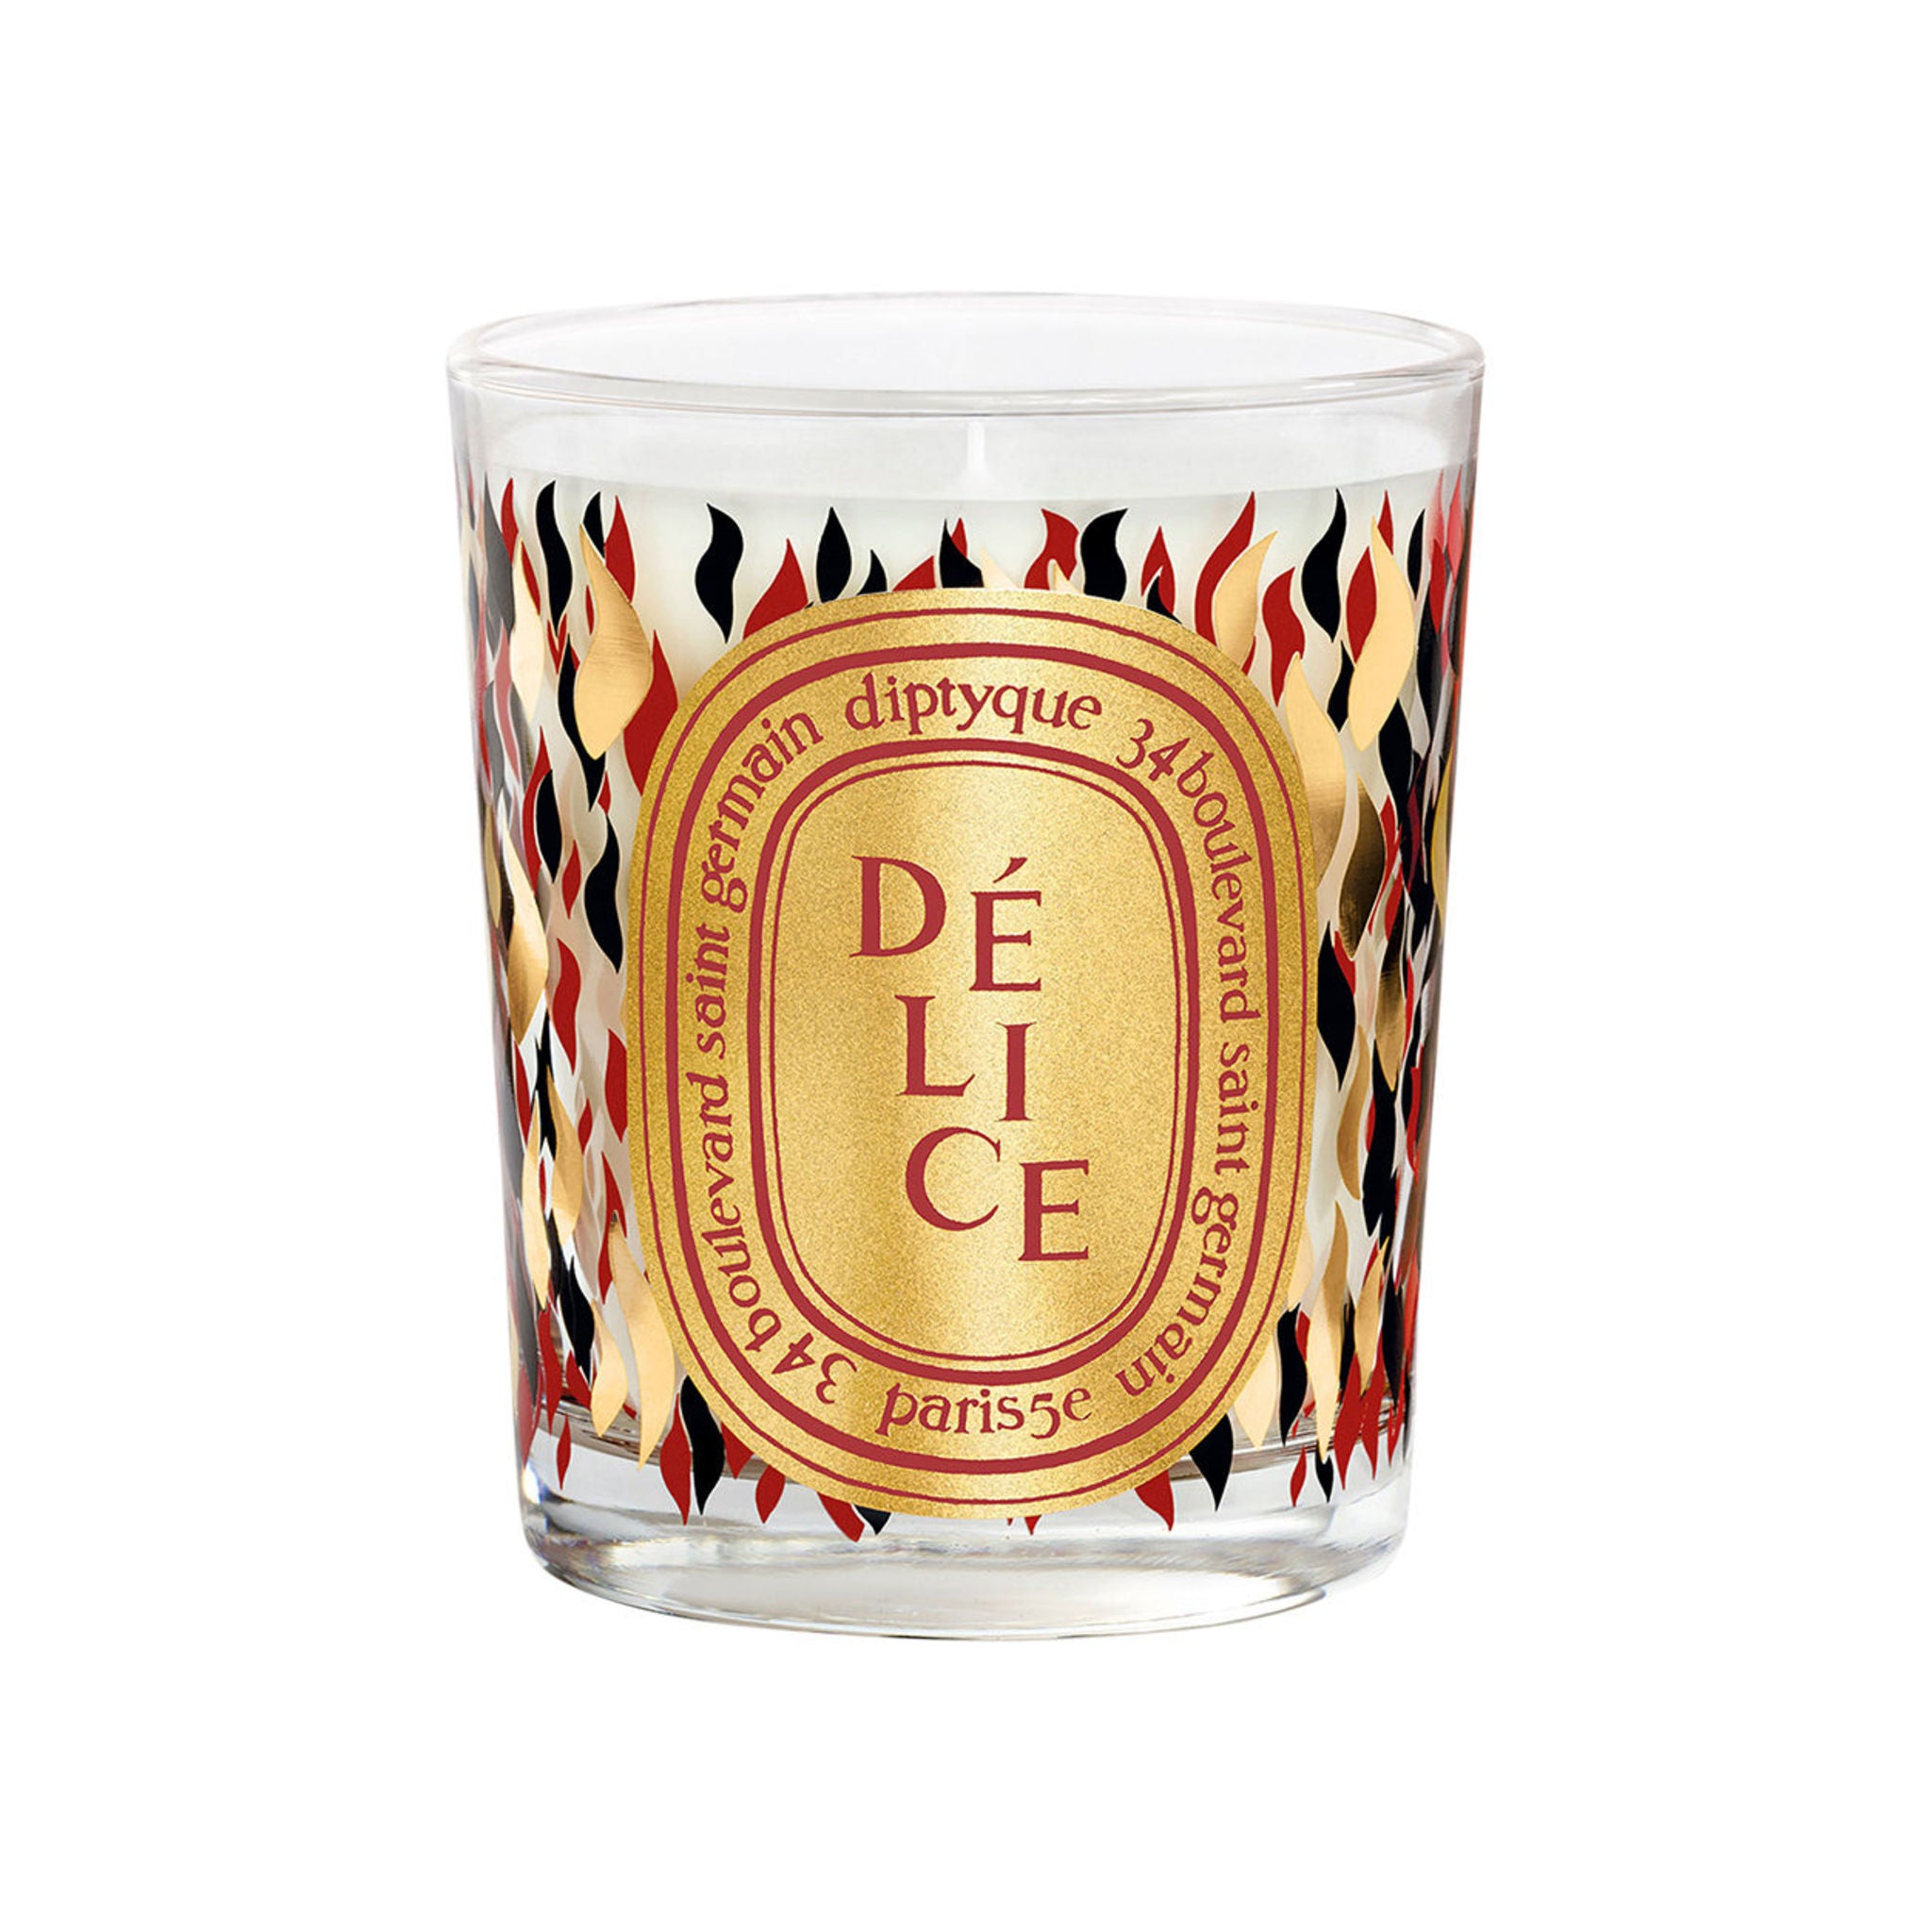 Diptyque Delice Scented Candle (Limited Edition) Size variant: 6.7 oz main image.